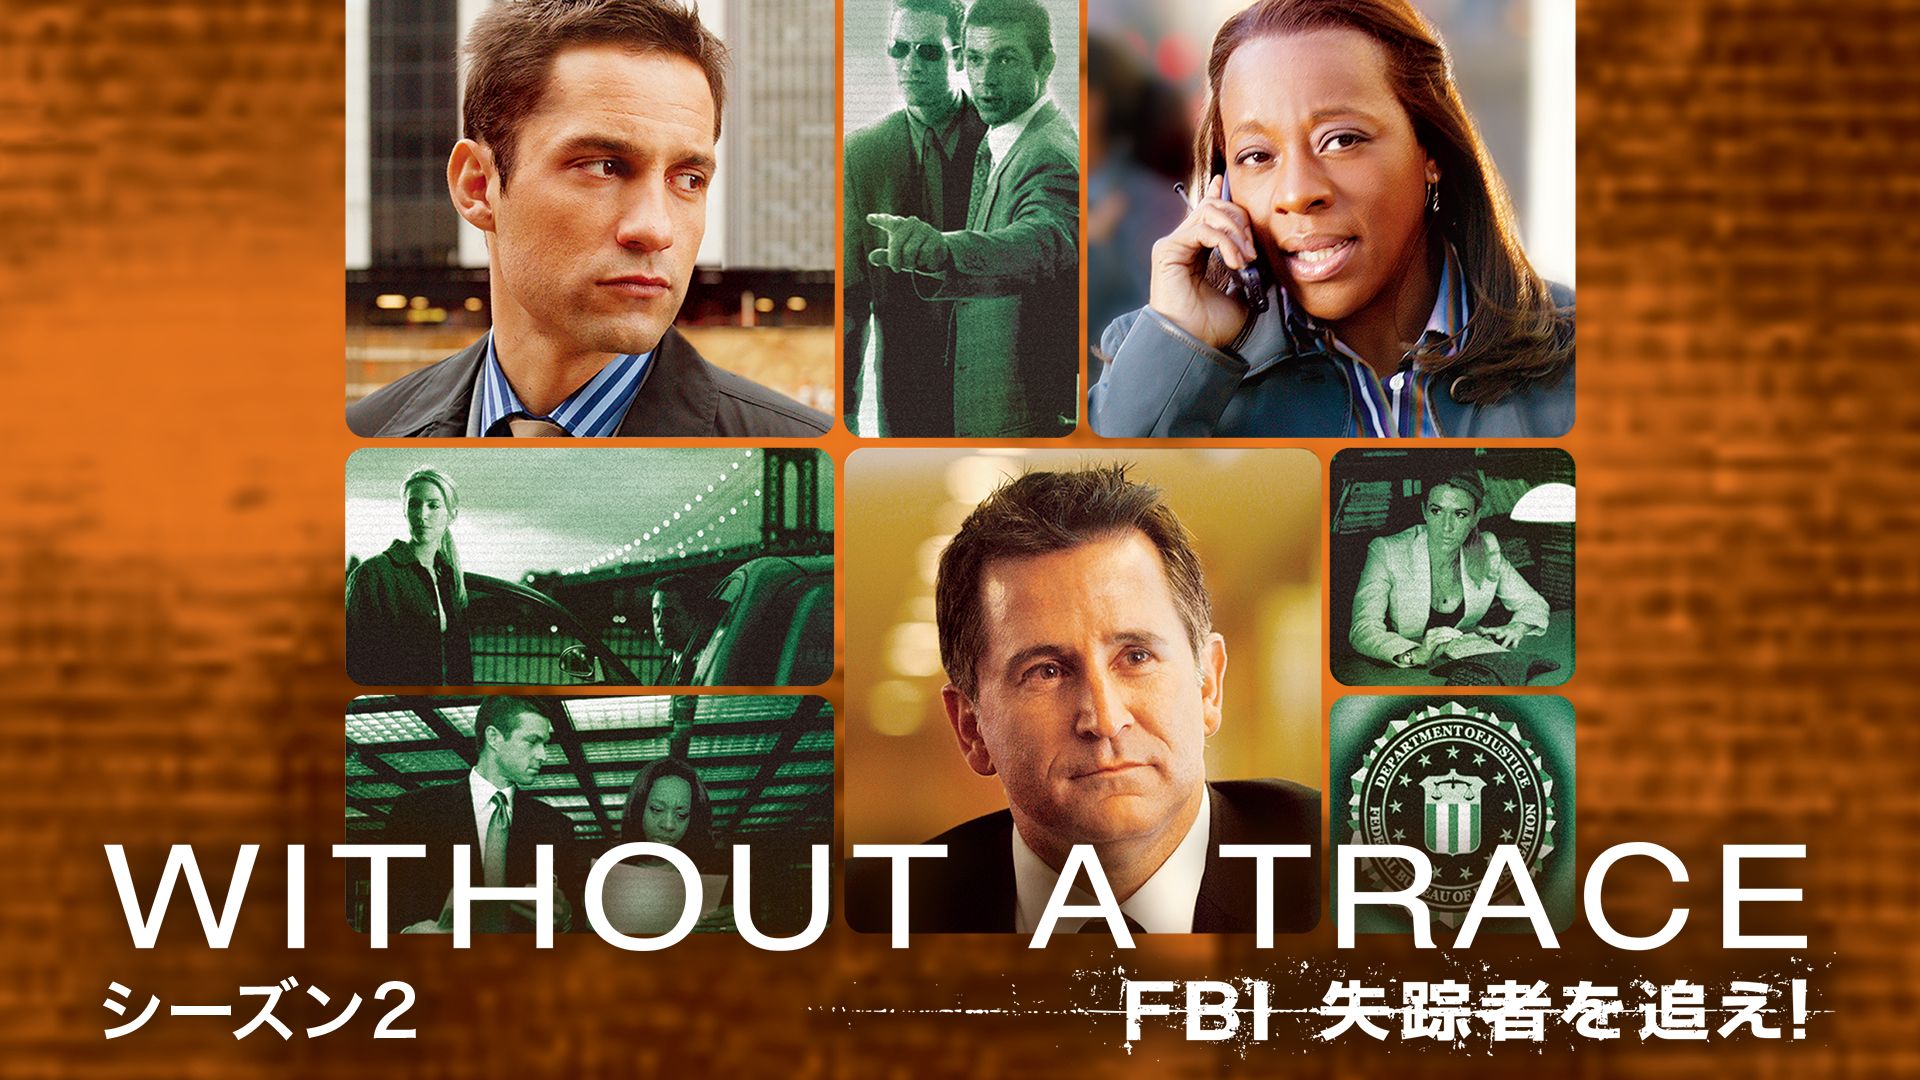 Without a Trace/FBI失踪者を追え! シーズン2